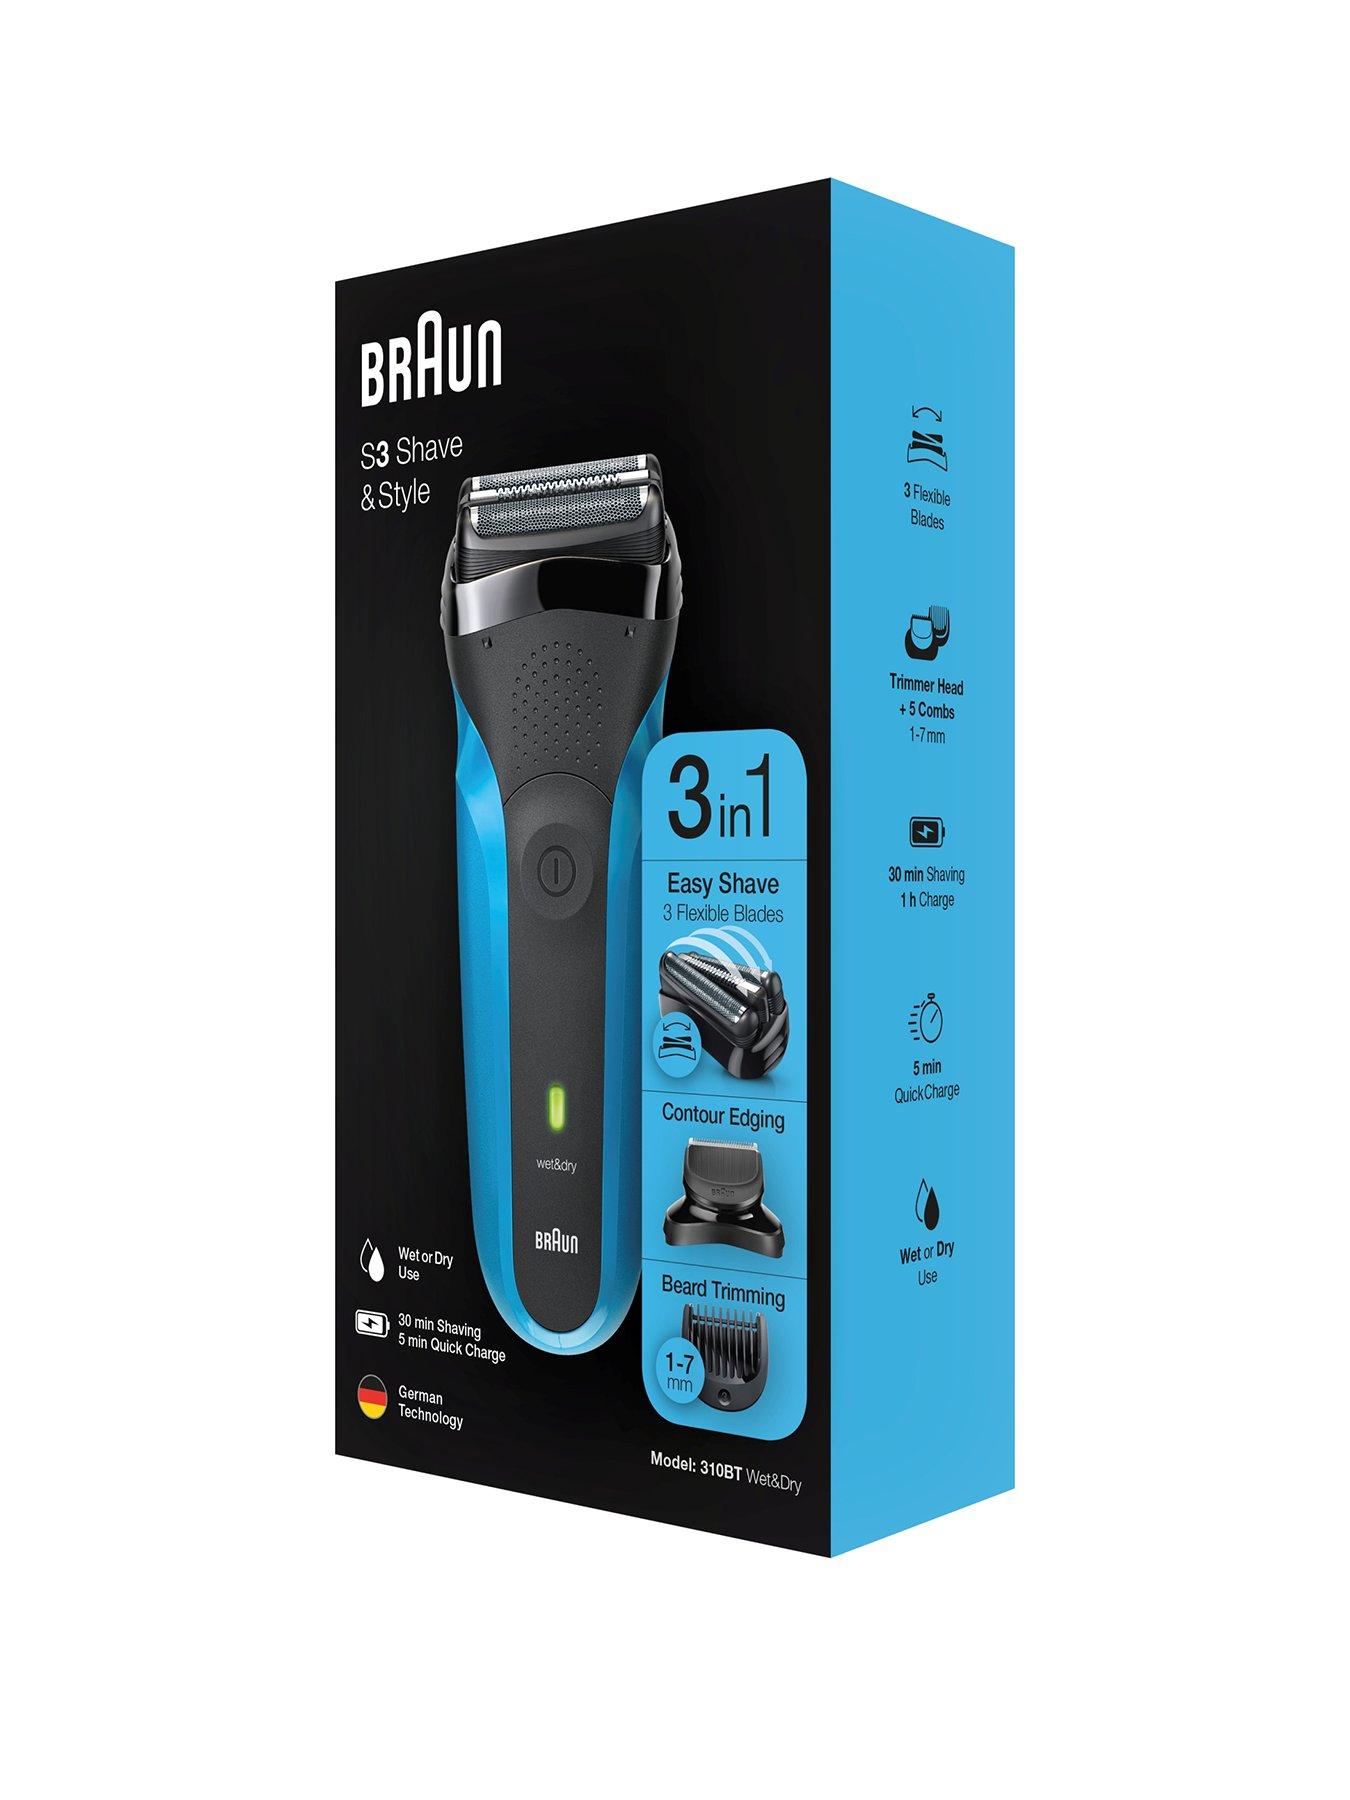 Braun S3 Shave & Style 310BT Electric Shaver, Wet & Dry Razor for Men